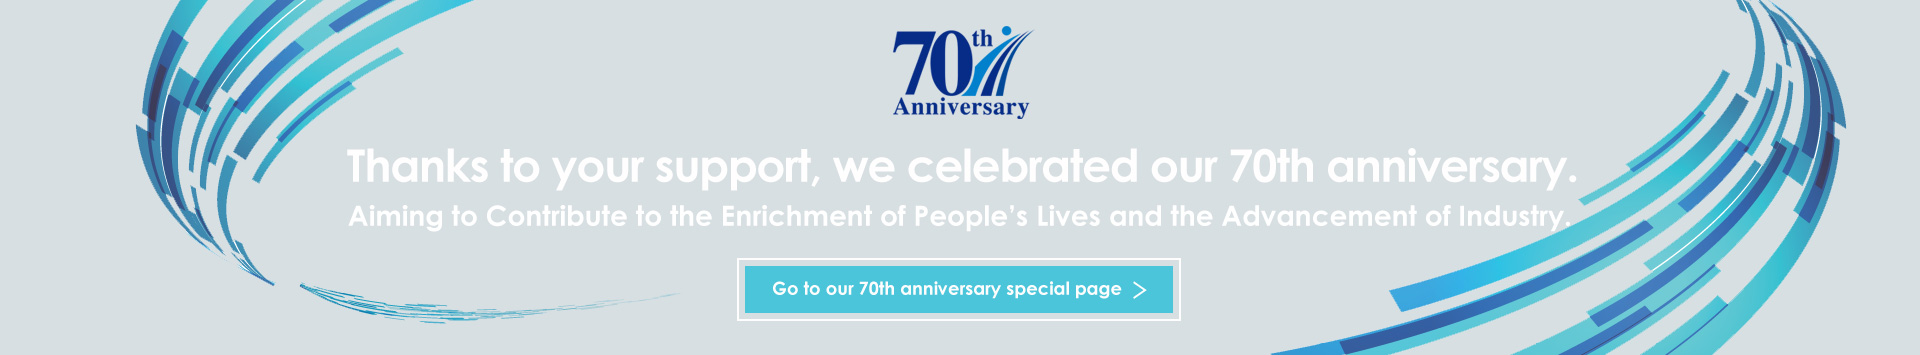 Thanks to your support, we celebrated our 70th anniversary.